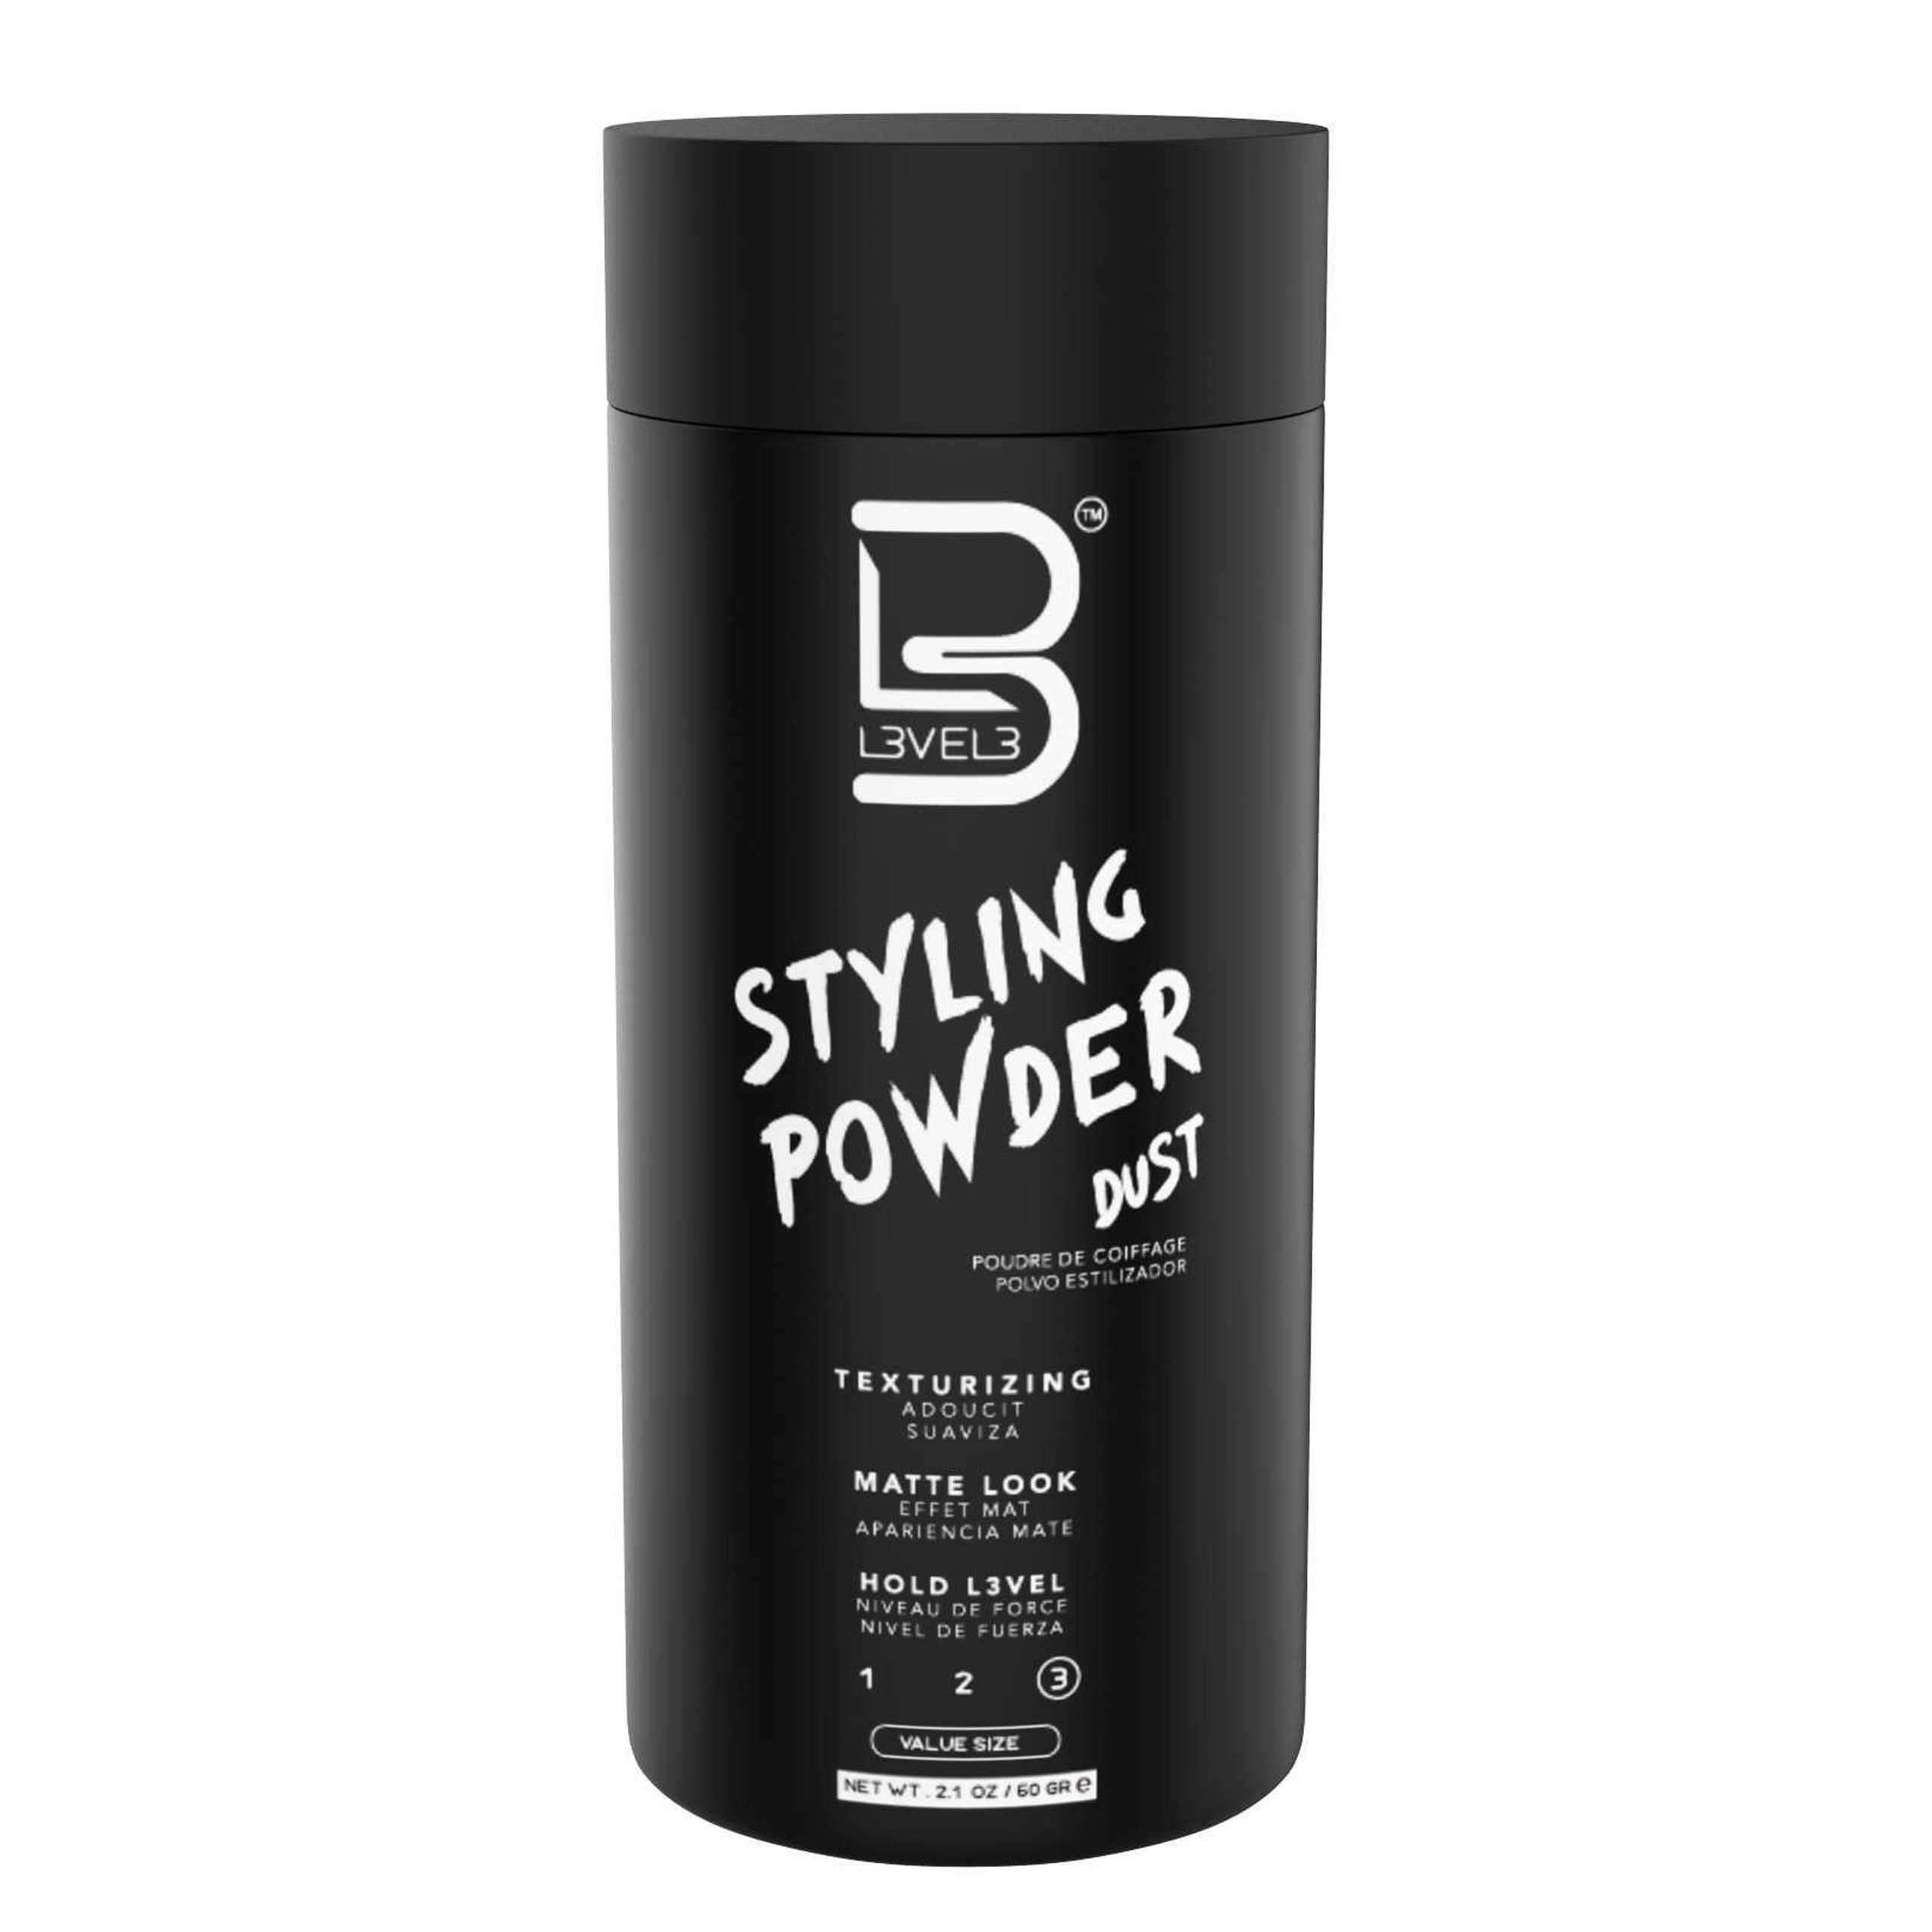 L3 Level 3 Styling Powder - Natural Look Mens Powder - Easy to Apply with No Oil or Greasy Residue (Large - 60 Grams)